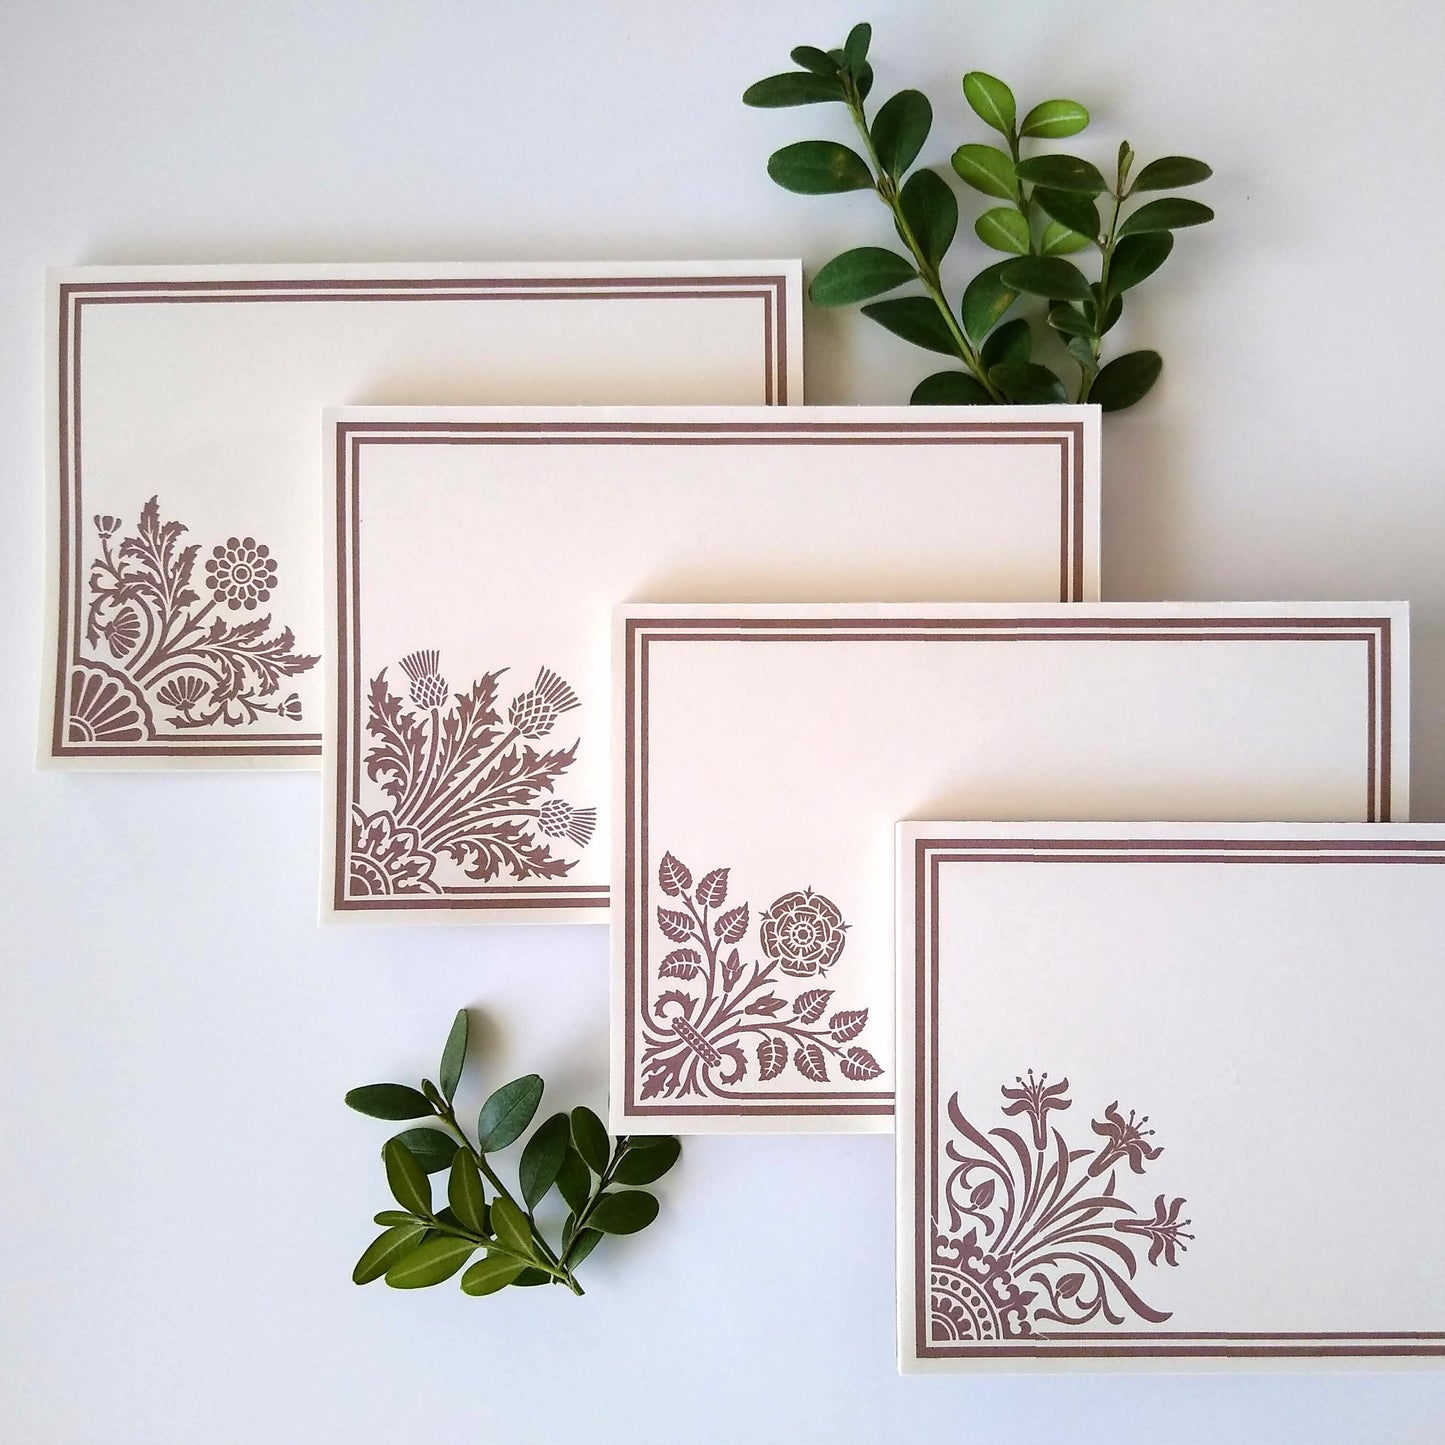 Four cream colored notepads on a white background. Sprigs of leaves rest around them. Each notepad has a stylized floral design in tan in the lower left corner with a double line border around the rest of the notepad.